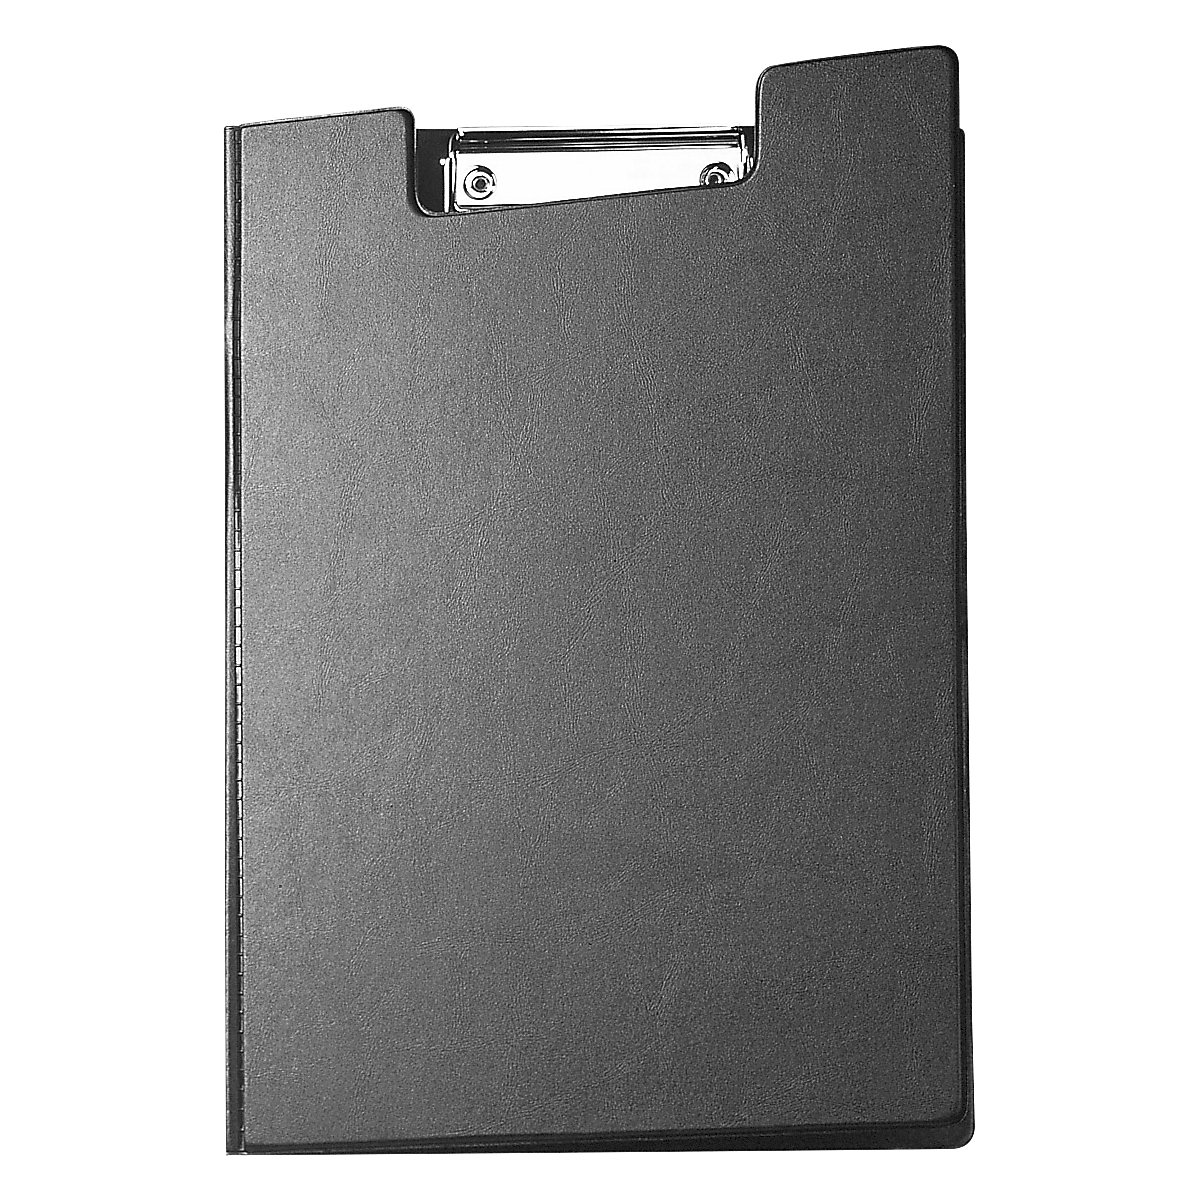 Writing case, film coating and cover – MAUL